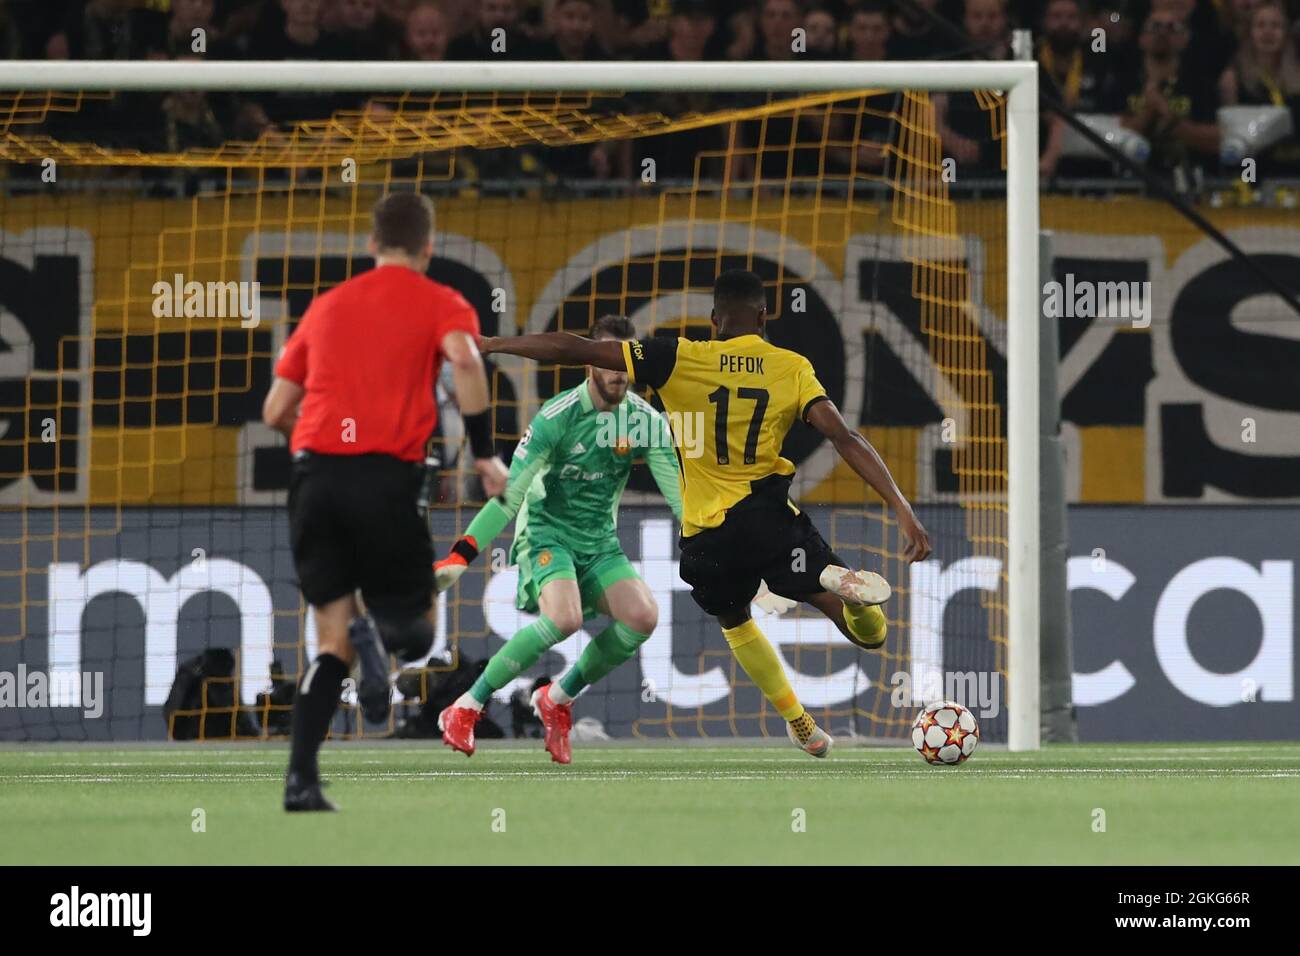 Berne, Switzerland, 14th September 2021. Jordan Siebatcheu of Young Boys  scores past David De Gea of Manchester United to give the side a late 2-1  lead during the UEFA Champions League match